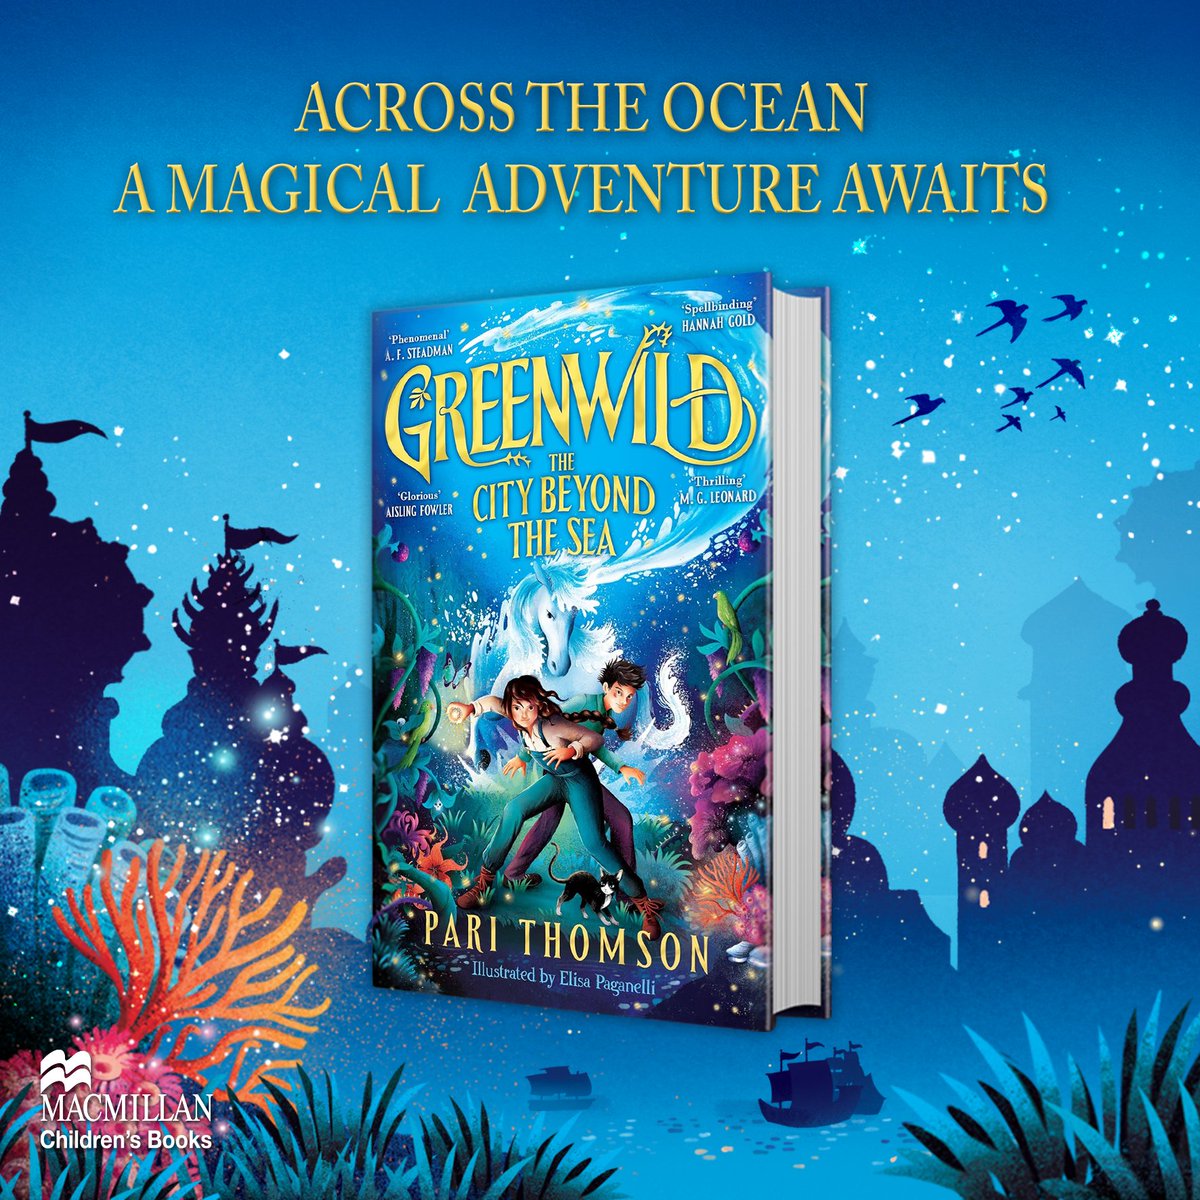 🌿✨ Exciting News! 📚💫Coming this May: Greenwild: The City Beyond the Sea written by @PariThomson Get ready for new discoveries and mysterious botanical magic beneath the waves. 🌊🔮 Pre-order 👉 @WaterstonesKids 📚✨ @macmillankidsuk #Greenwild #elisapaganelli